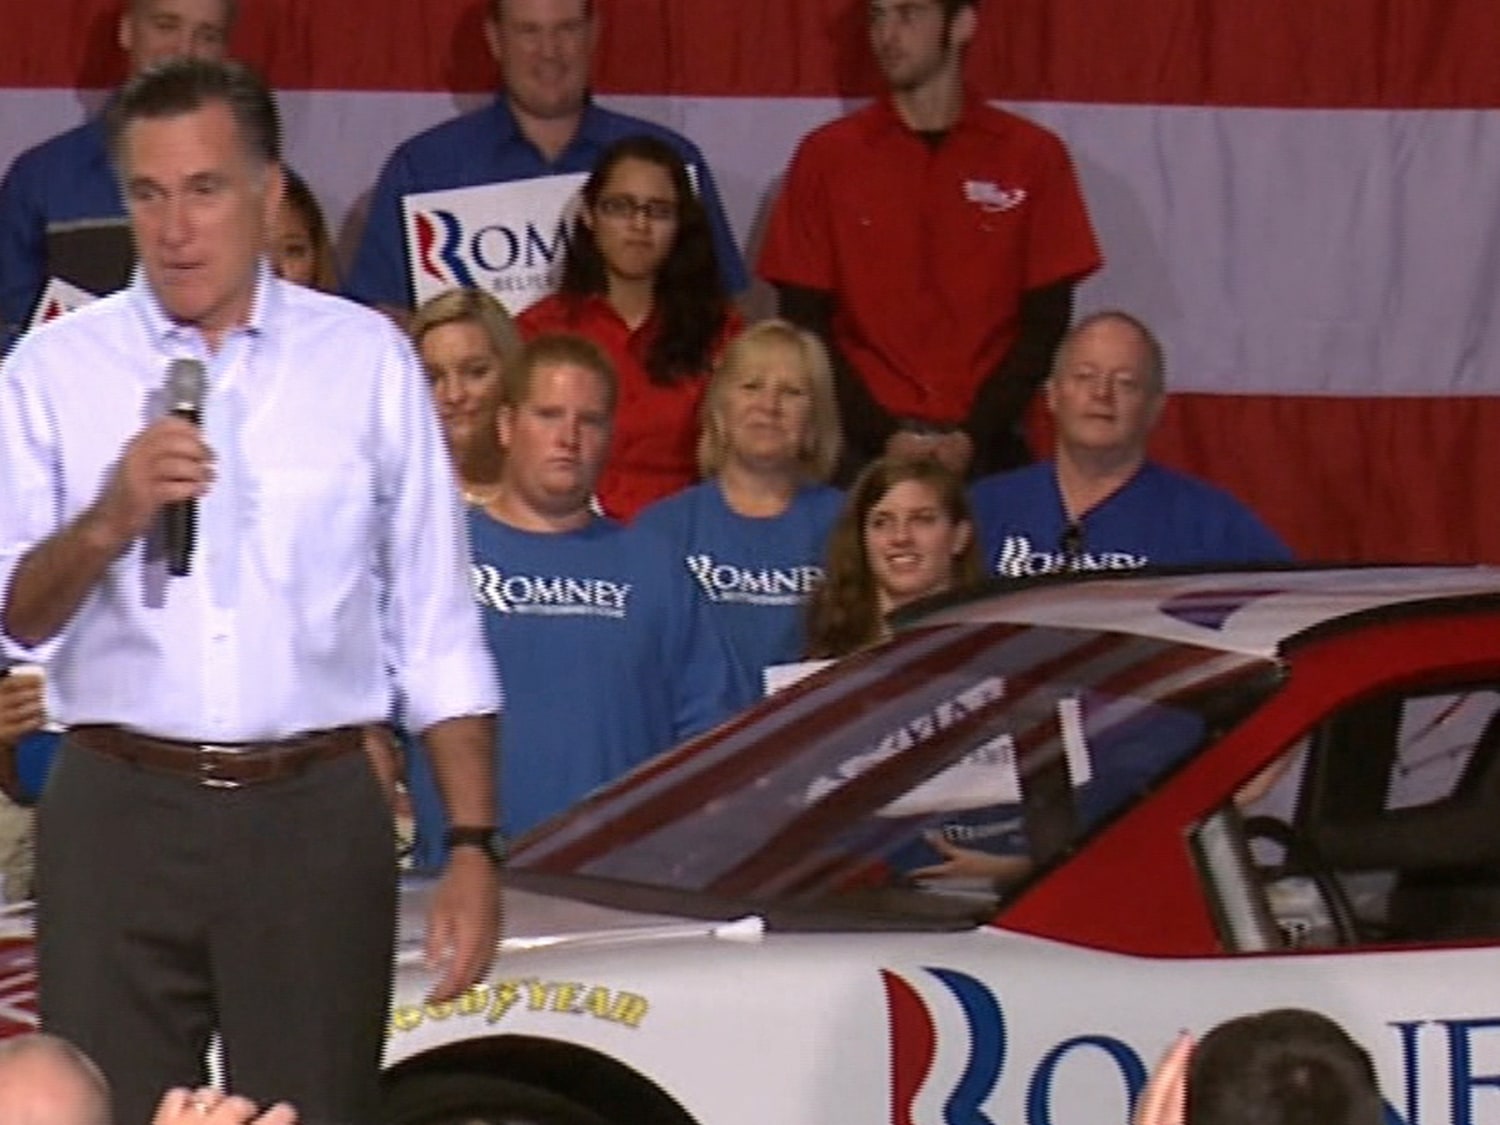 Romney-Ryan drives away with Nascar support